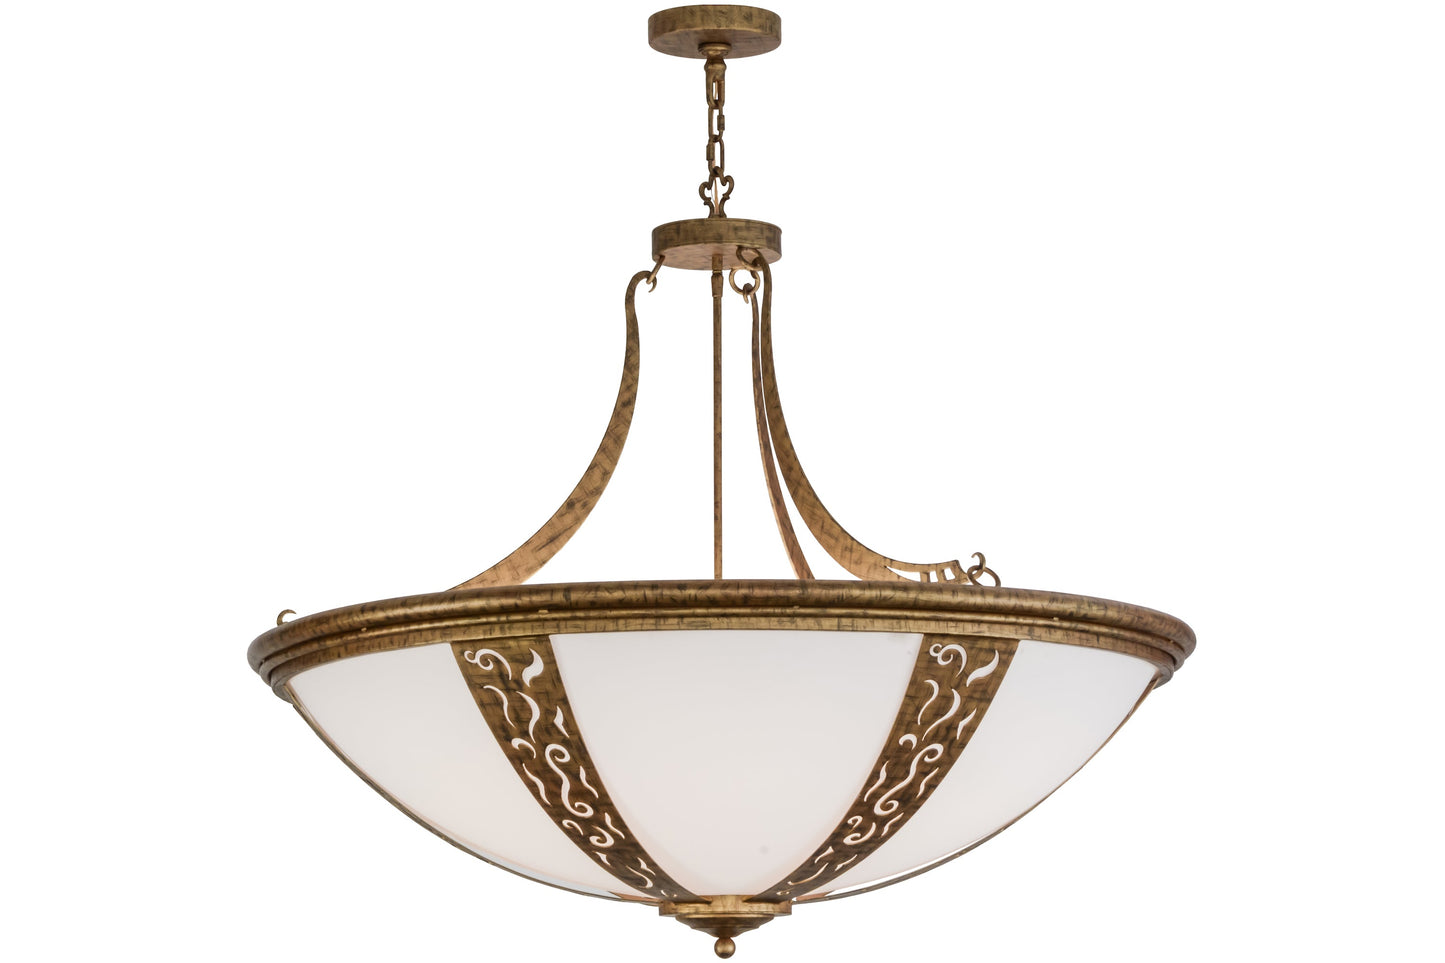 42" Grayson Inverted Pendant by 2nd Ave Lighting